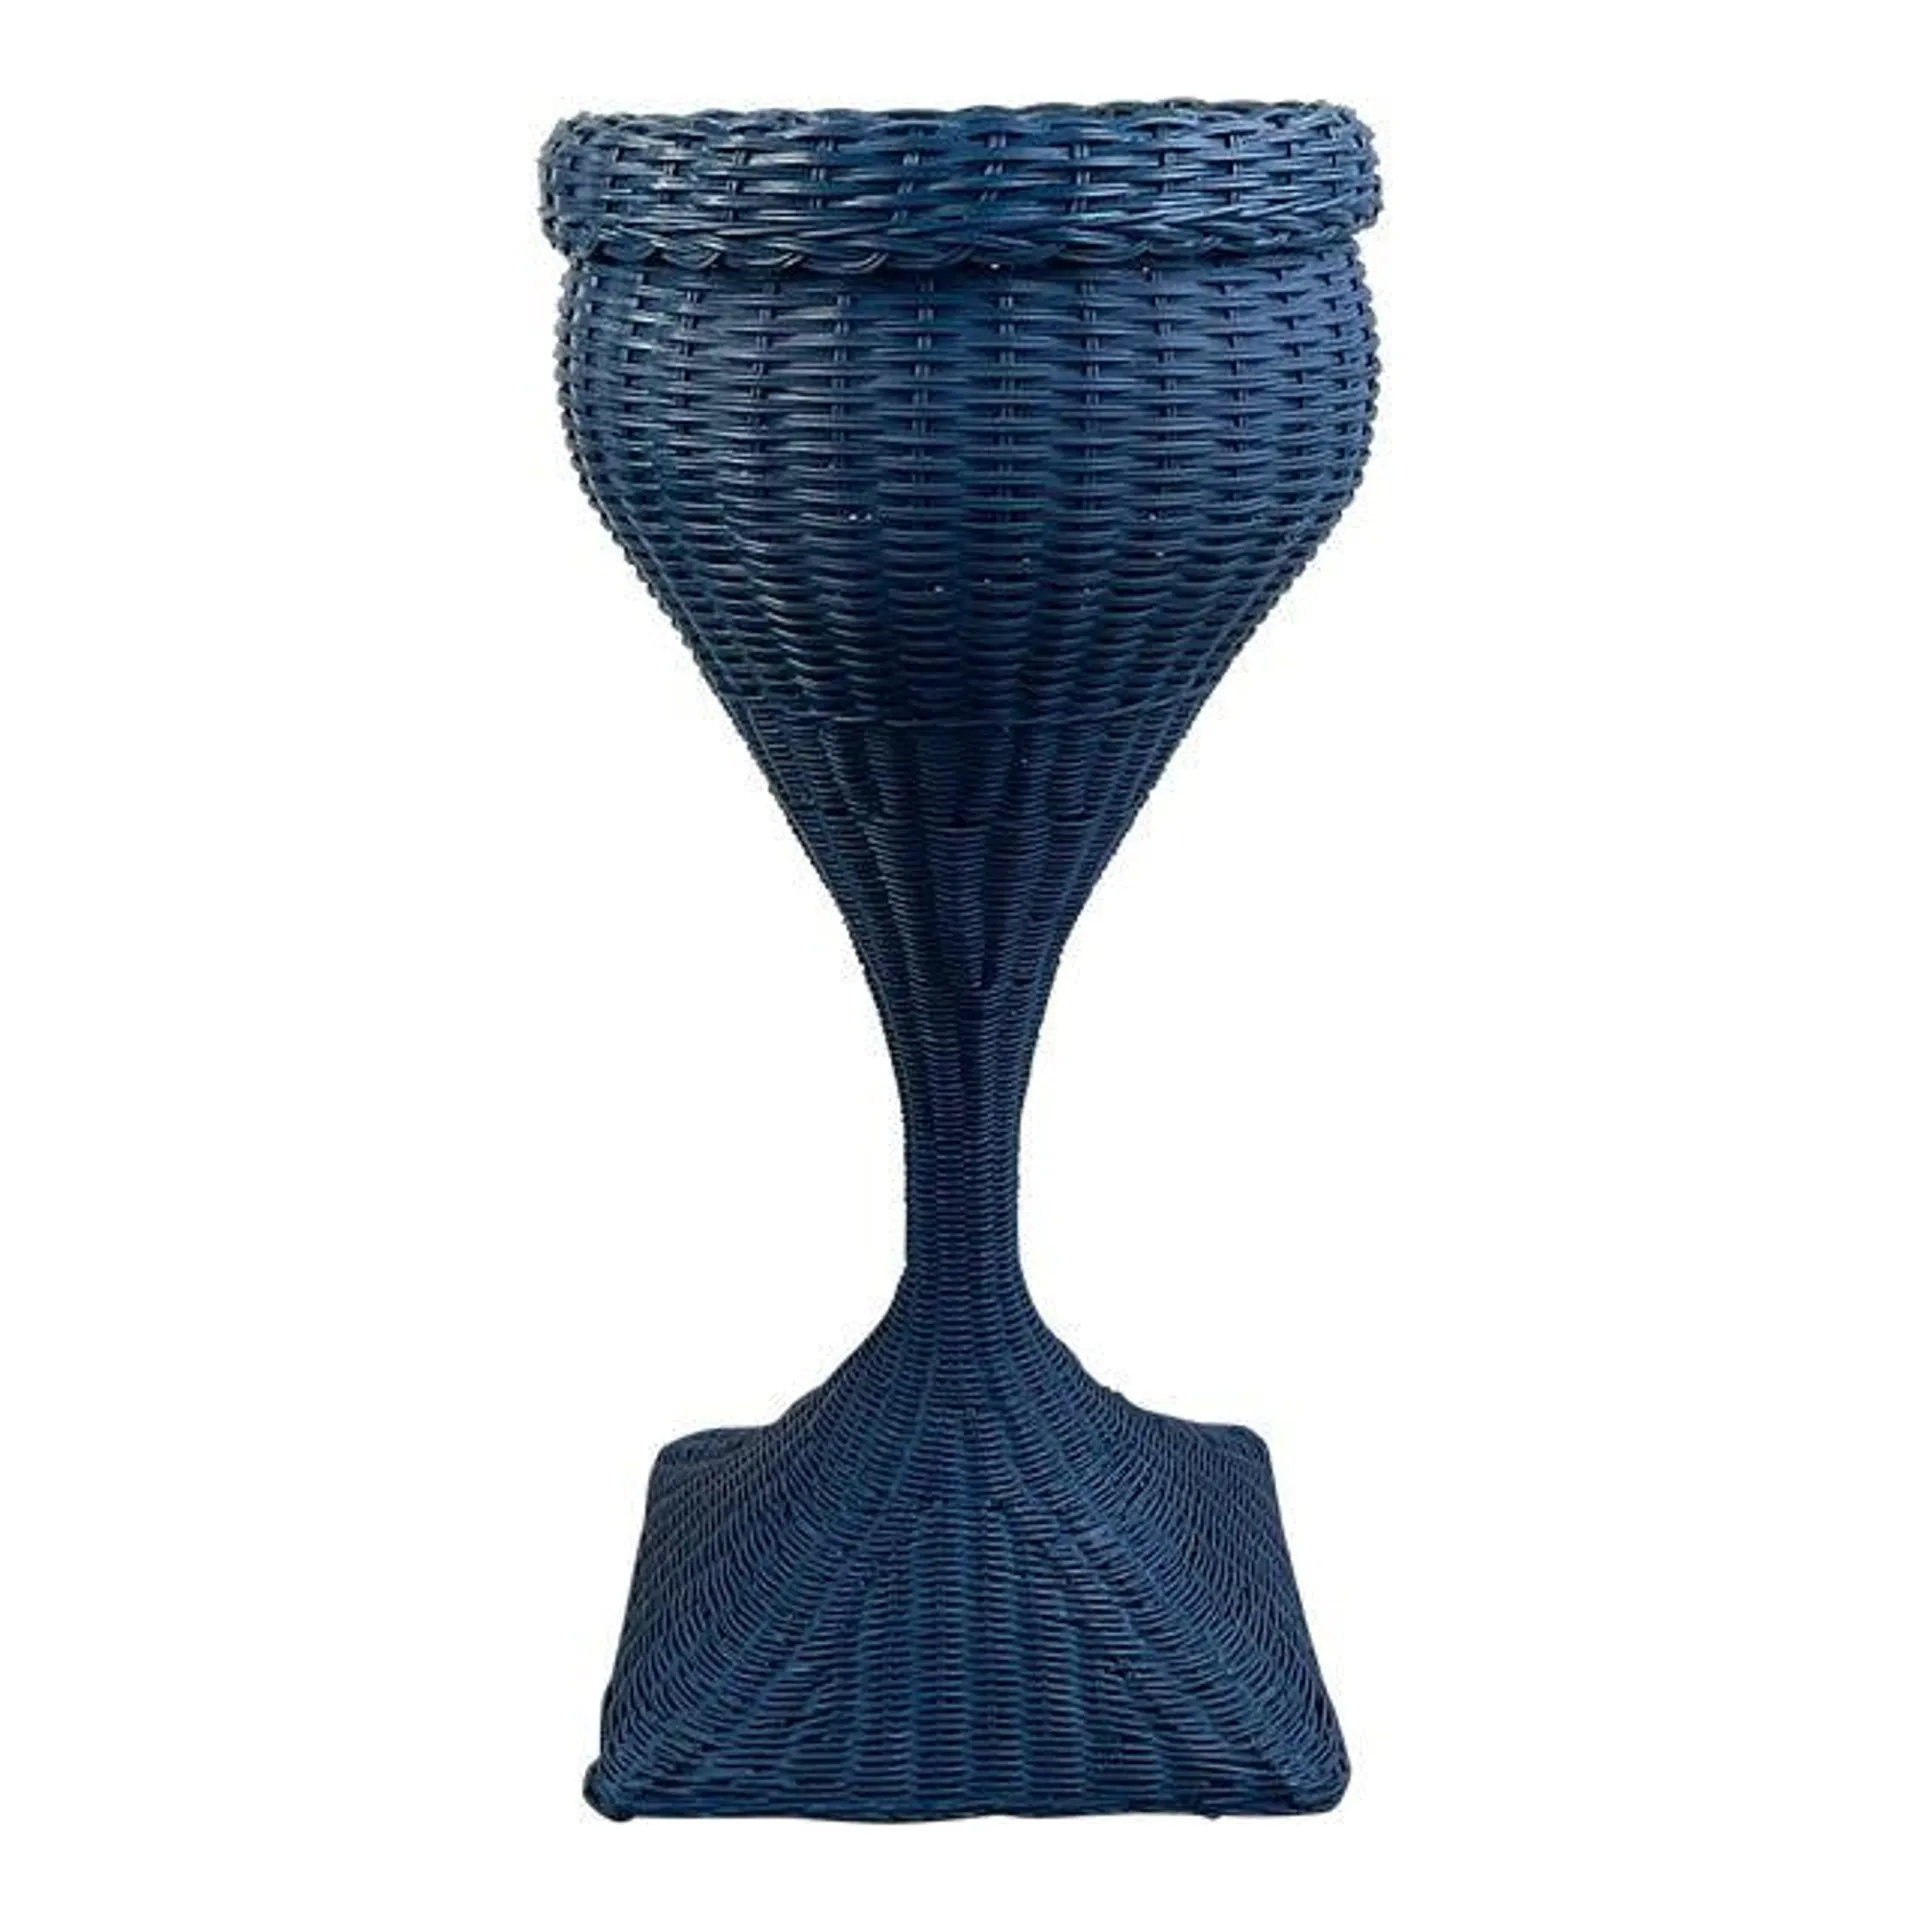 Mid-Century Vintage Tall Wicker Tulip Plant Stand, Newly Painted Cadet Blue.